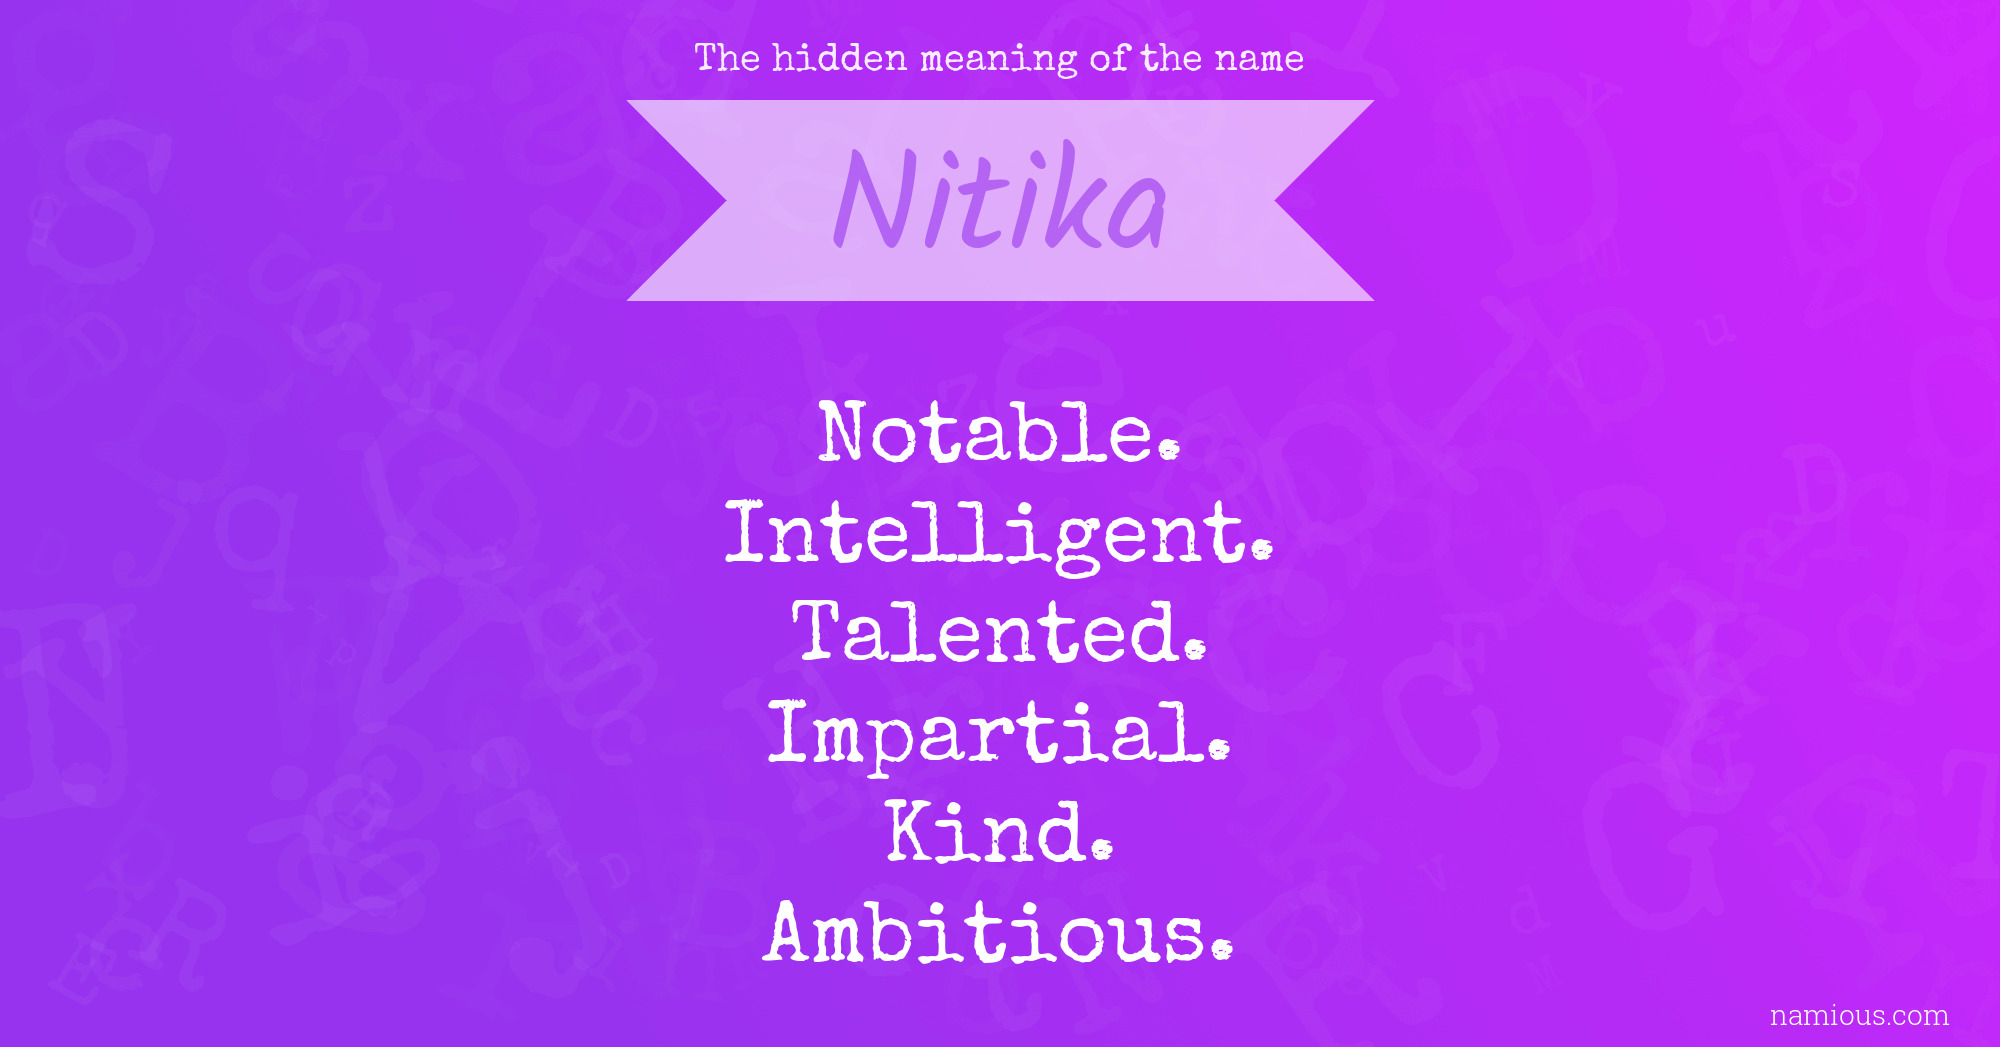 The hidden meaning of the name Nitika